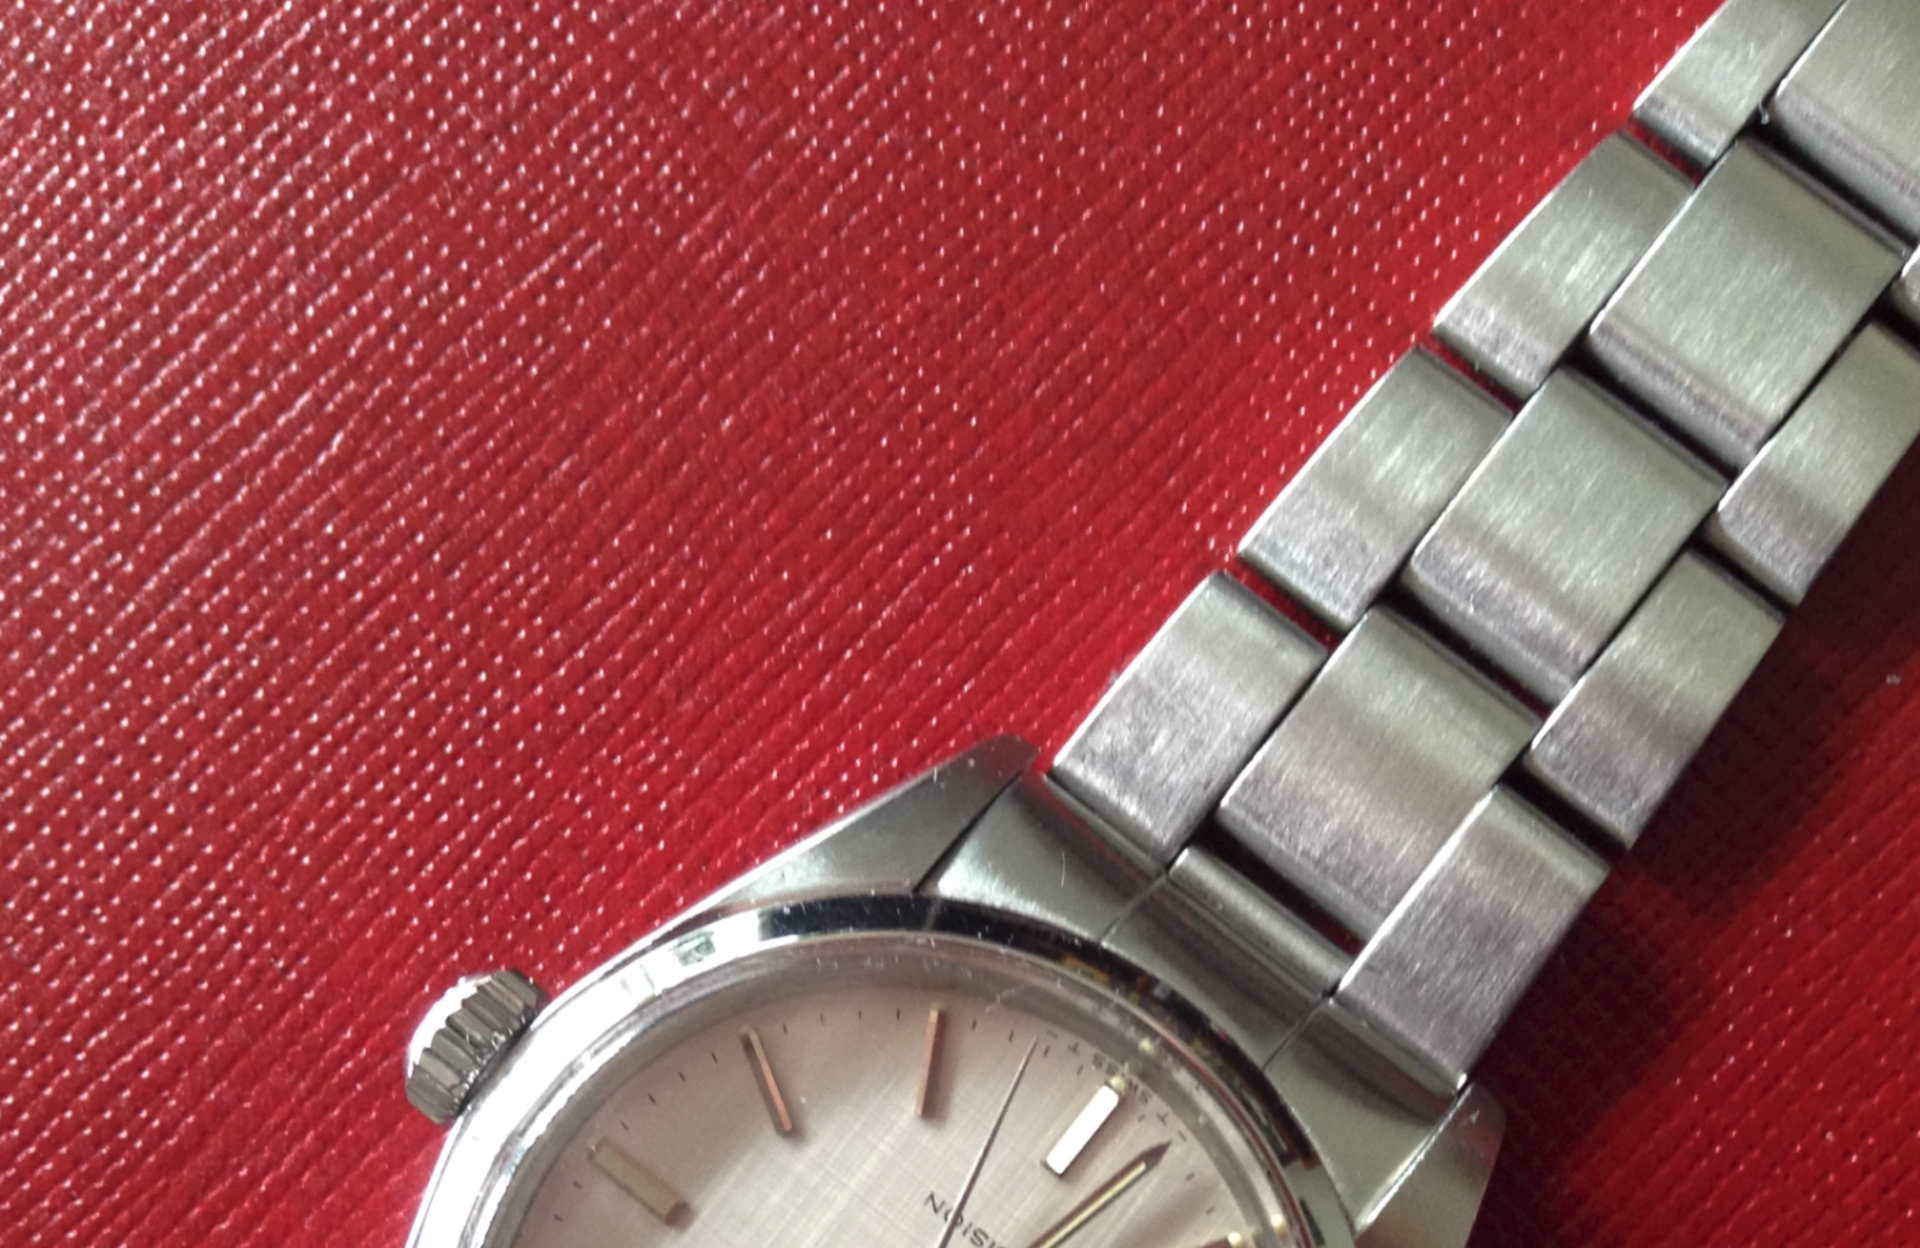 Rolex Gents Oyster Precision 6426 Stainless Steel with Silver Linen Dial 1972 **Reserve Lowered** - Image 3 of 9